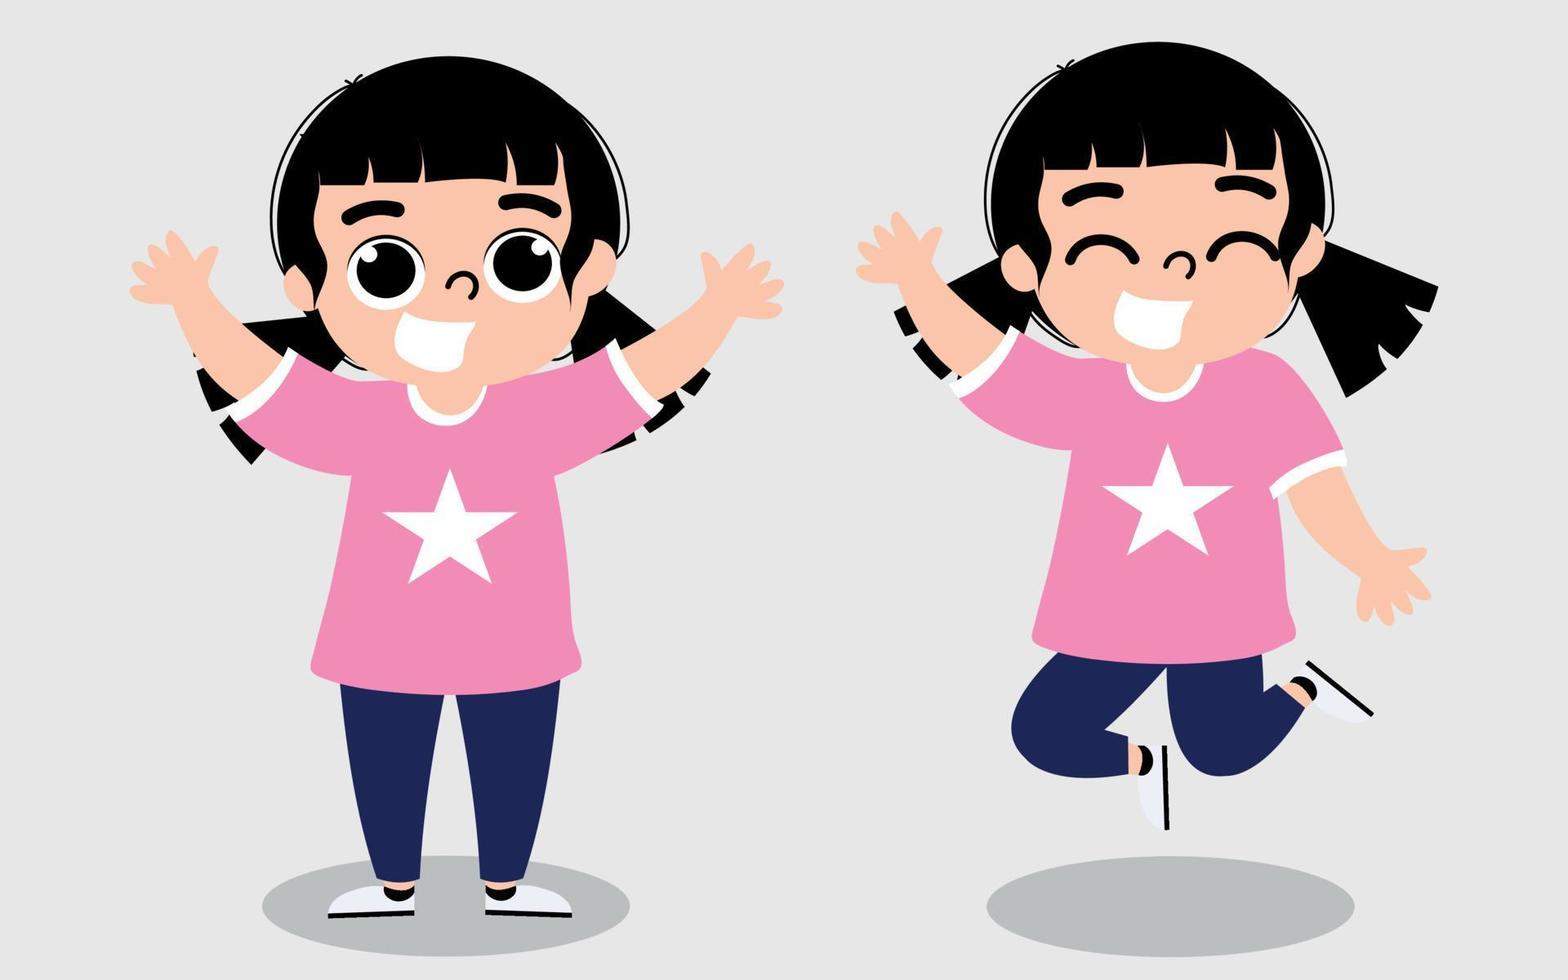 Children expression character vector